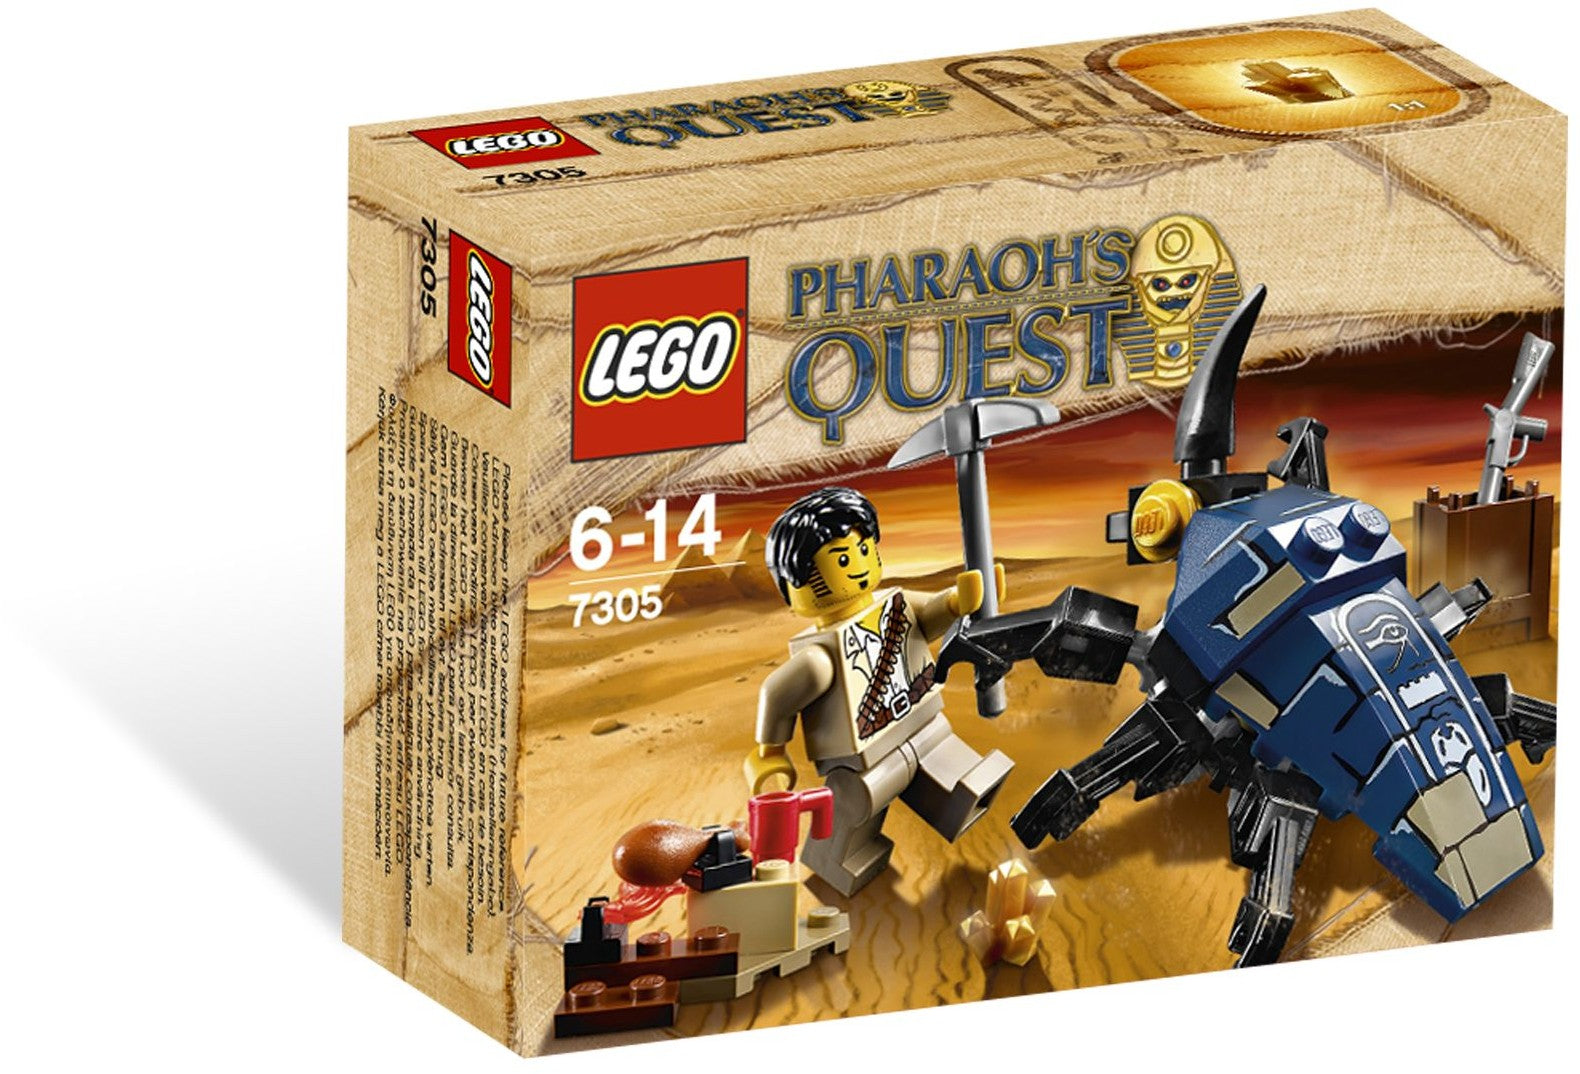 Lego Pharaoh's Quest 7305 - Scarab Attack